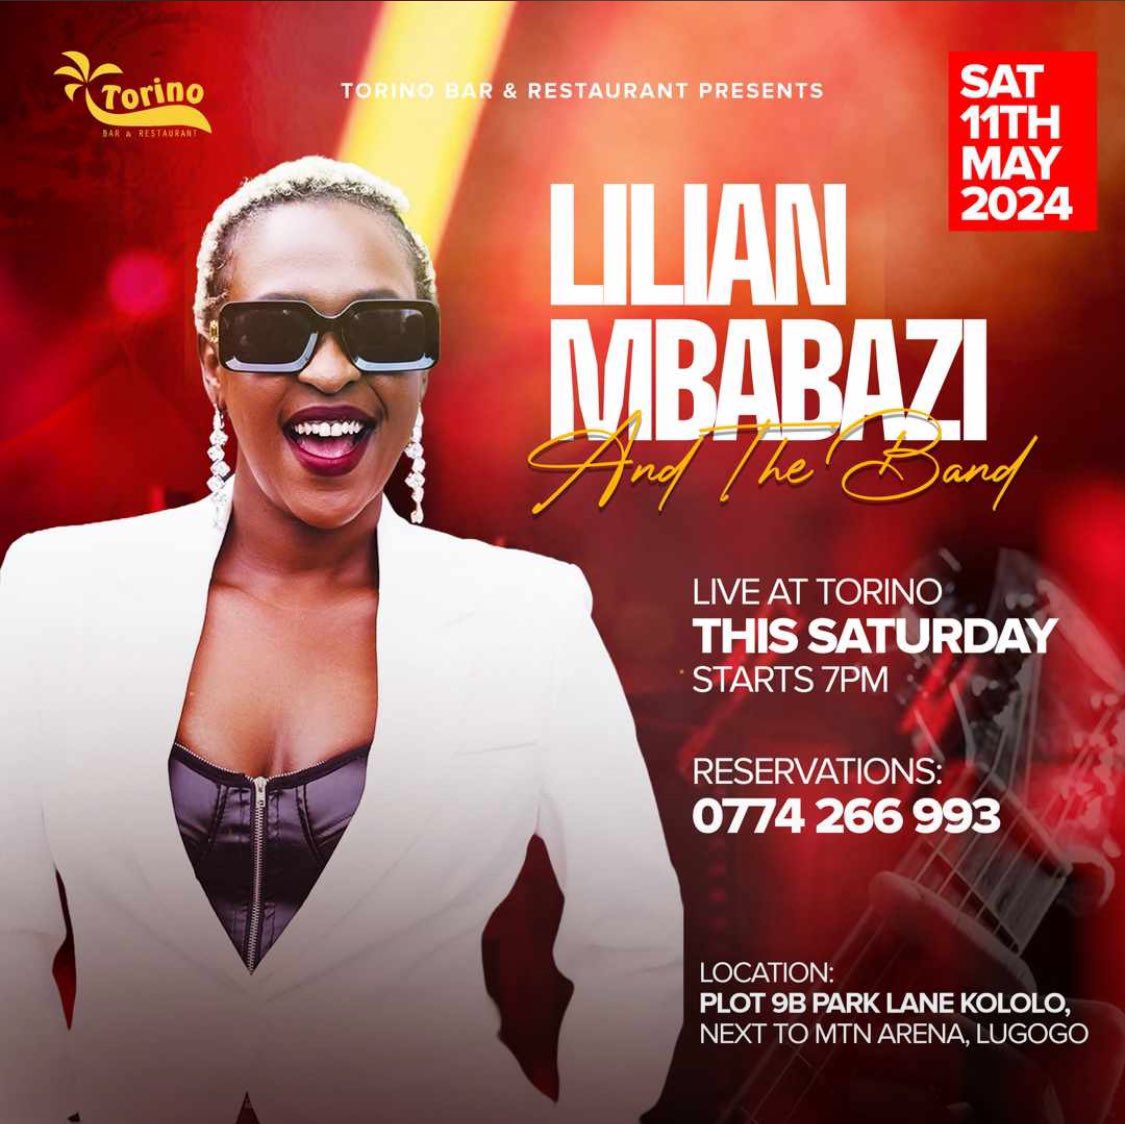 SATURDAY PLOT: 11/05 📌@lmbabazi And The Band 📍Torino Bar & Restaurant Join the amazing @lmbabazi And The Band this evening at Torino Bar & Restaurant for a live performance. When was the last time you heard her soulful voice? For reservations ☎️ 0774266993